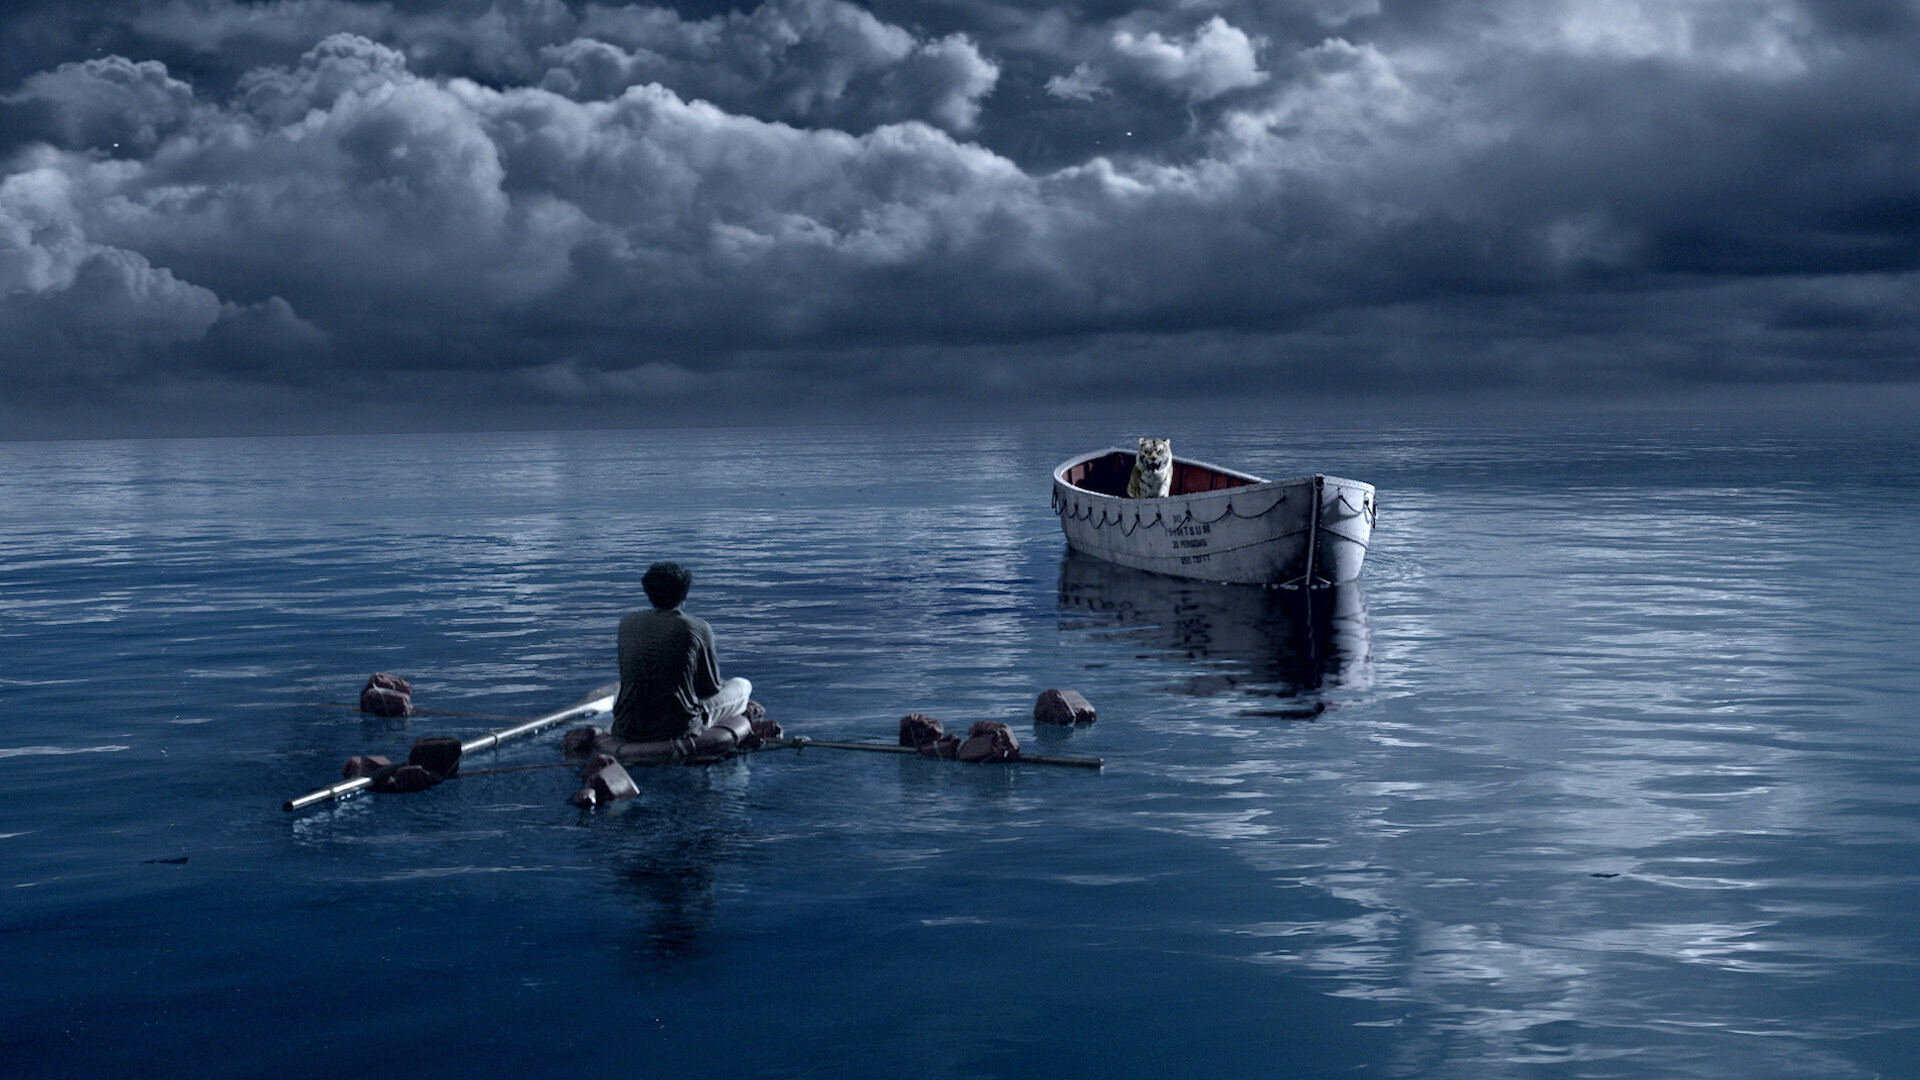 Life of Pi: One of the most unique and visually appealing movies of the past decade, Produced by Gil Netter and Ang Lee. 1920x1080 Full HD Wallpaper.